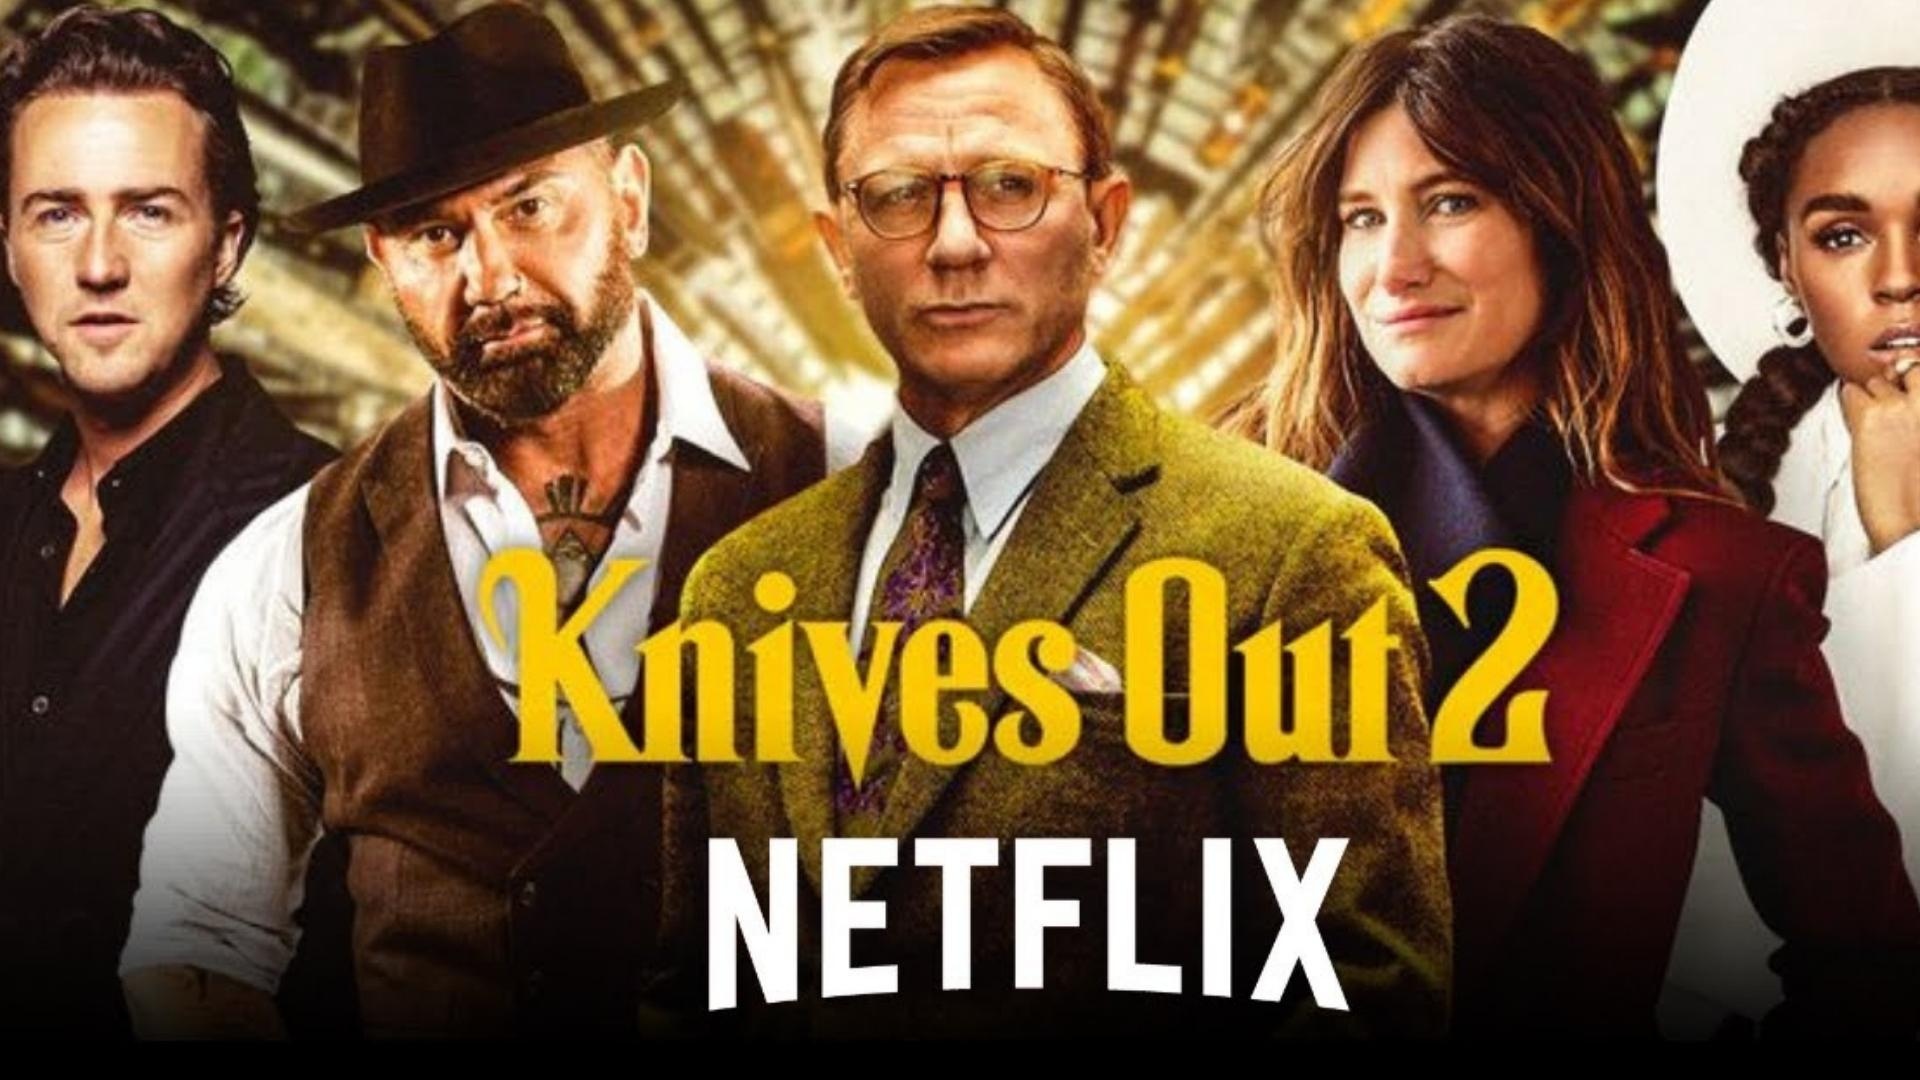 Knives Out 2: A standalone sequel to the 2019 film, Netflix. 1920x1080 Full HD Background.